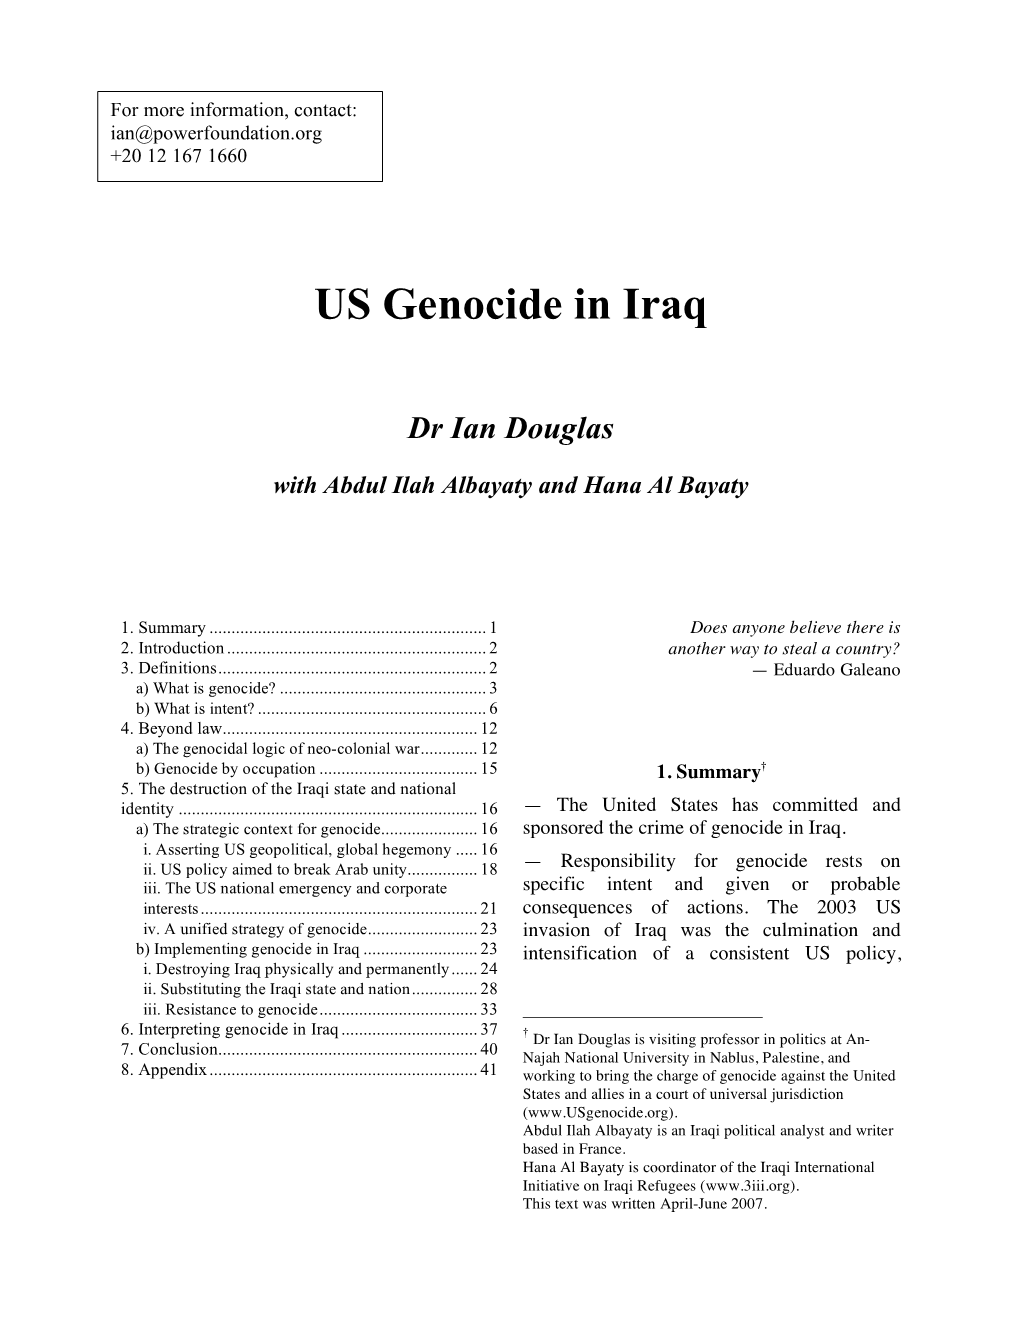 US Genocide in Iraq